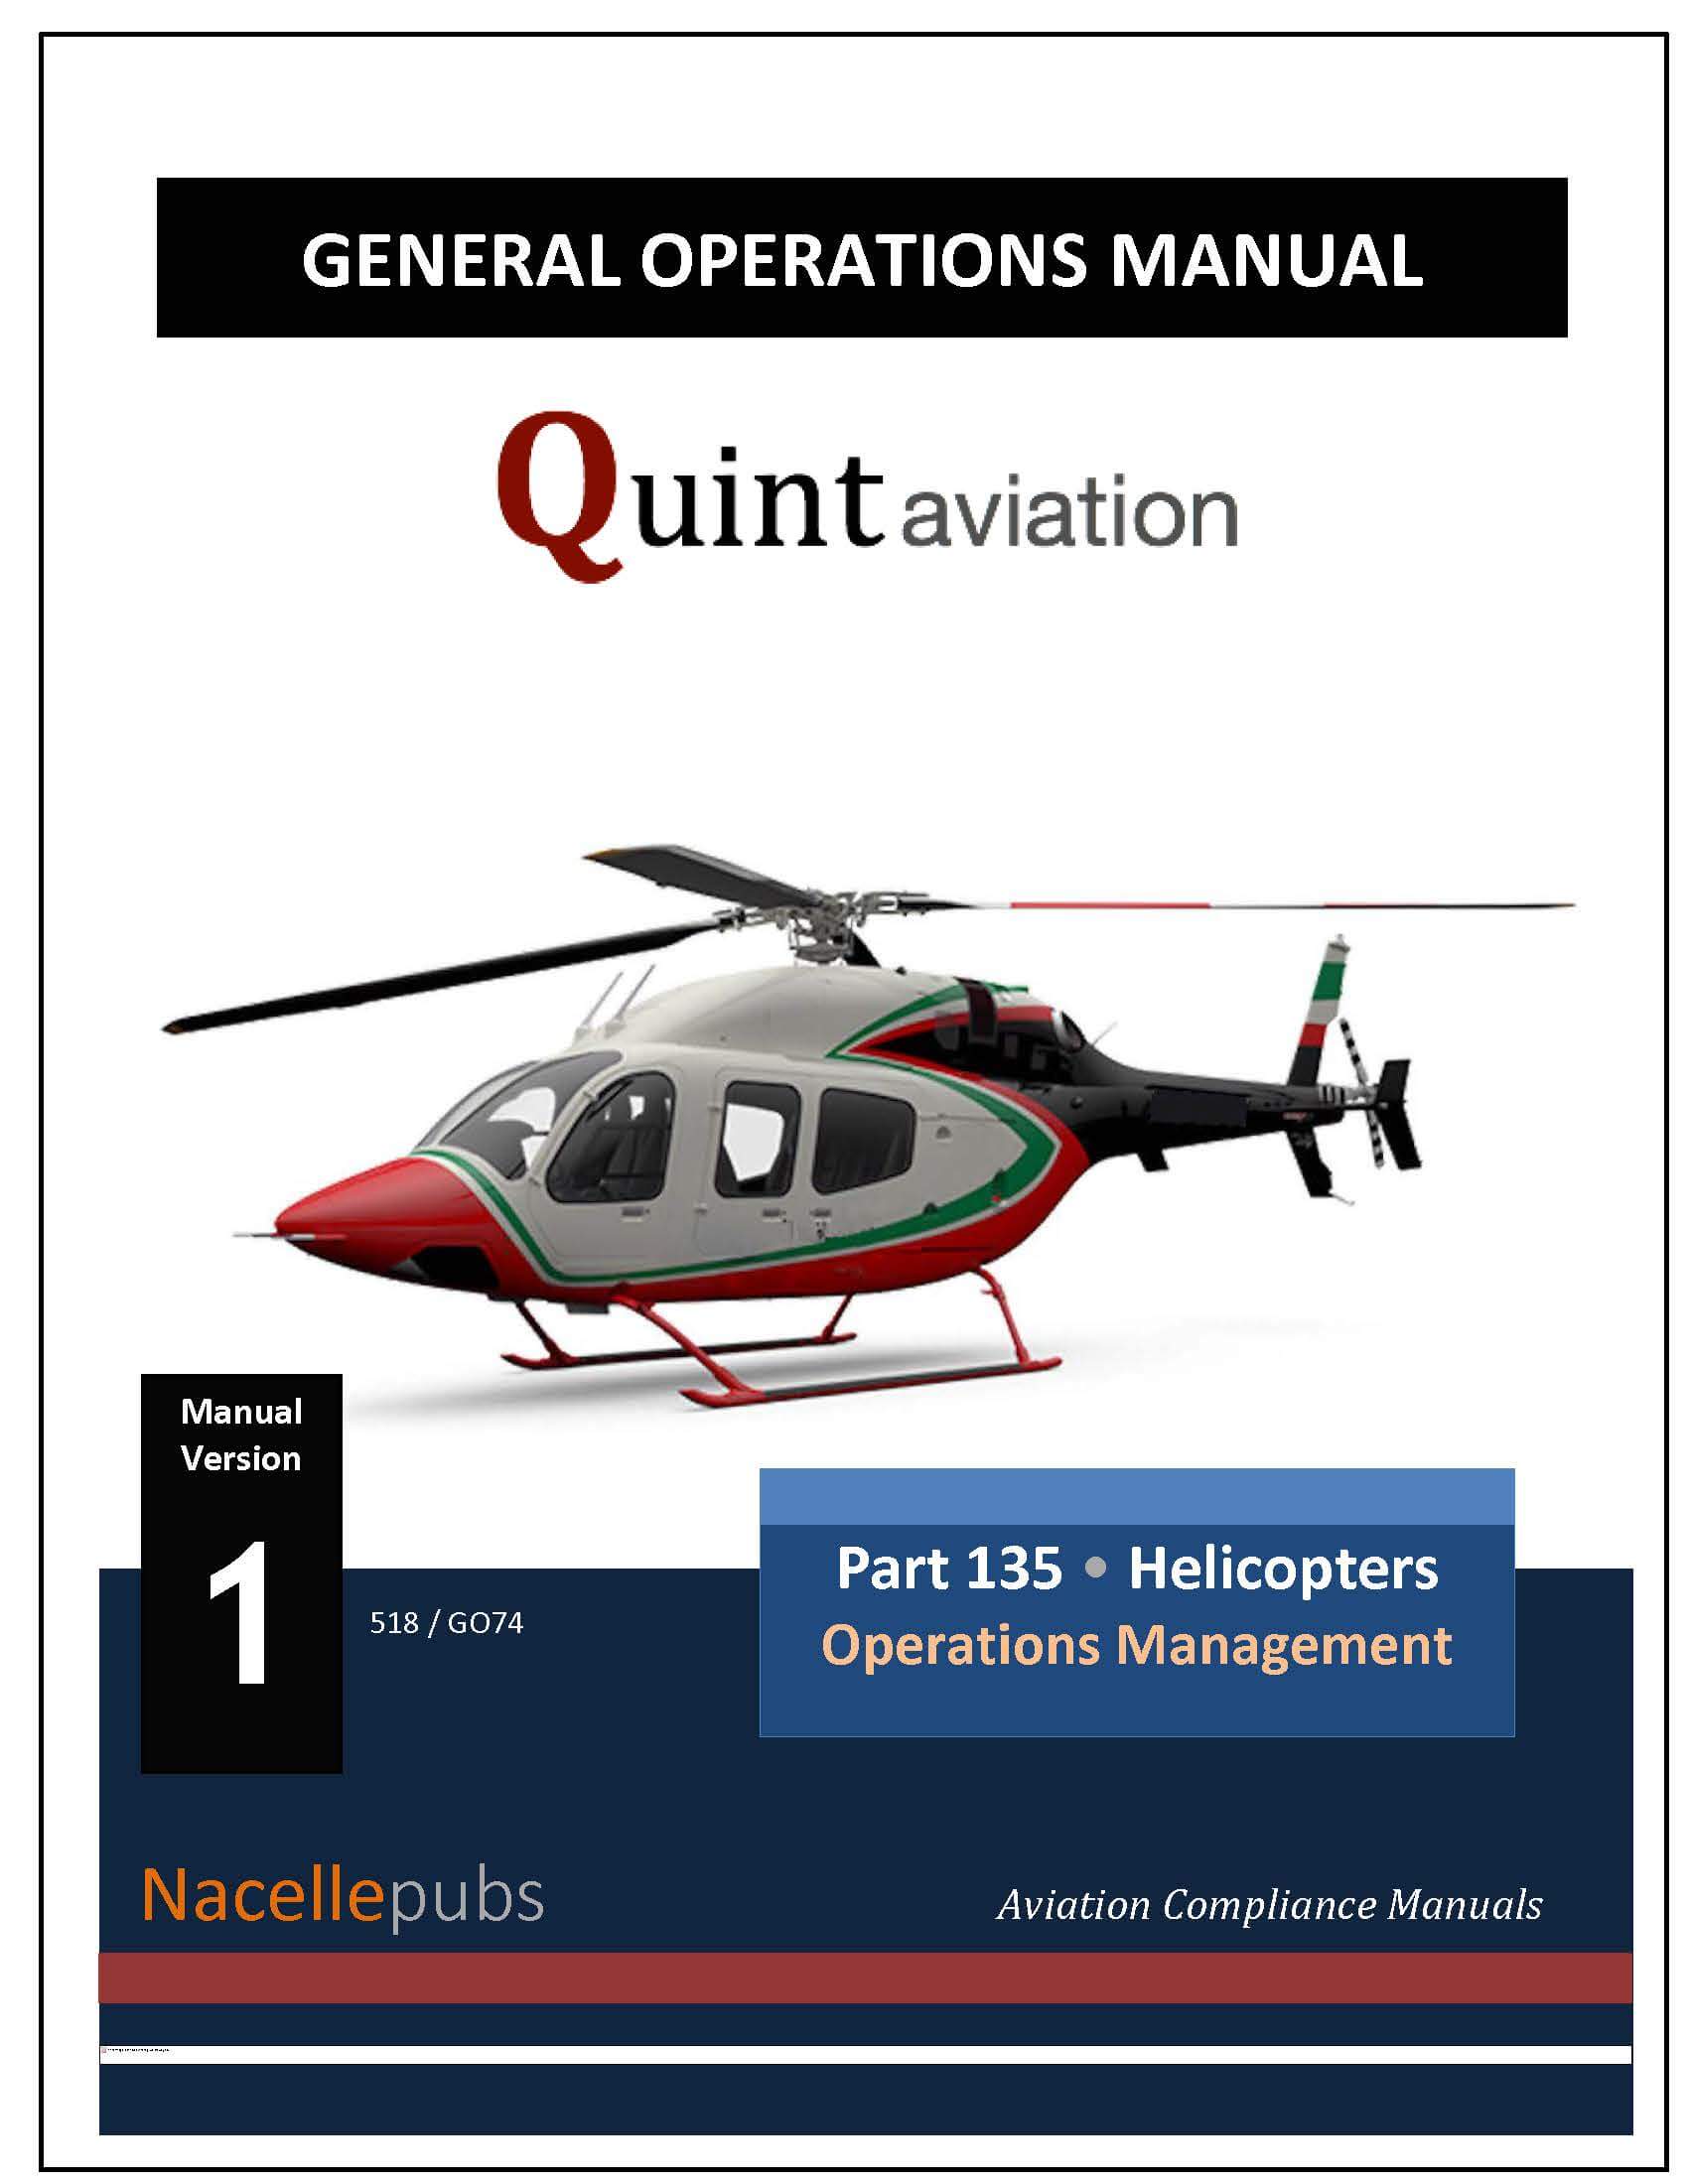 FAA Part 135 General Operations Manual (GOM) for Helicopters